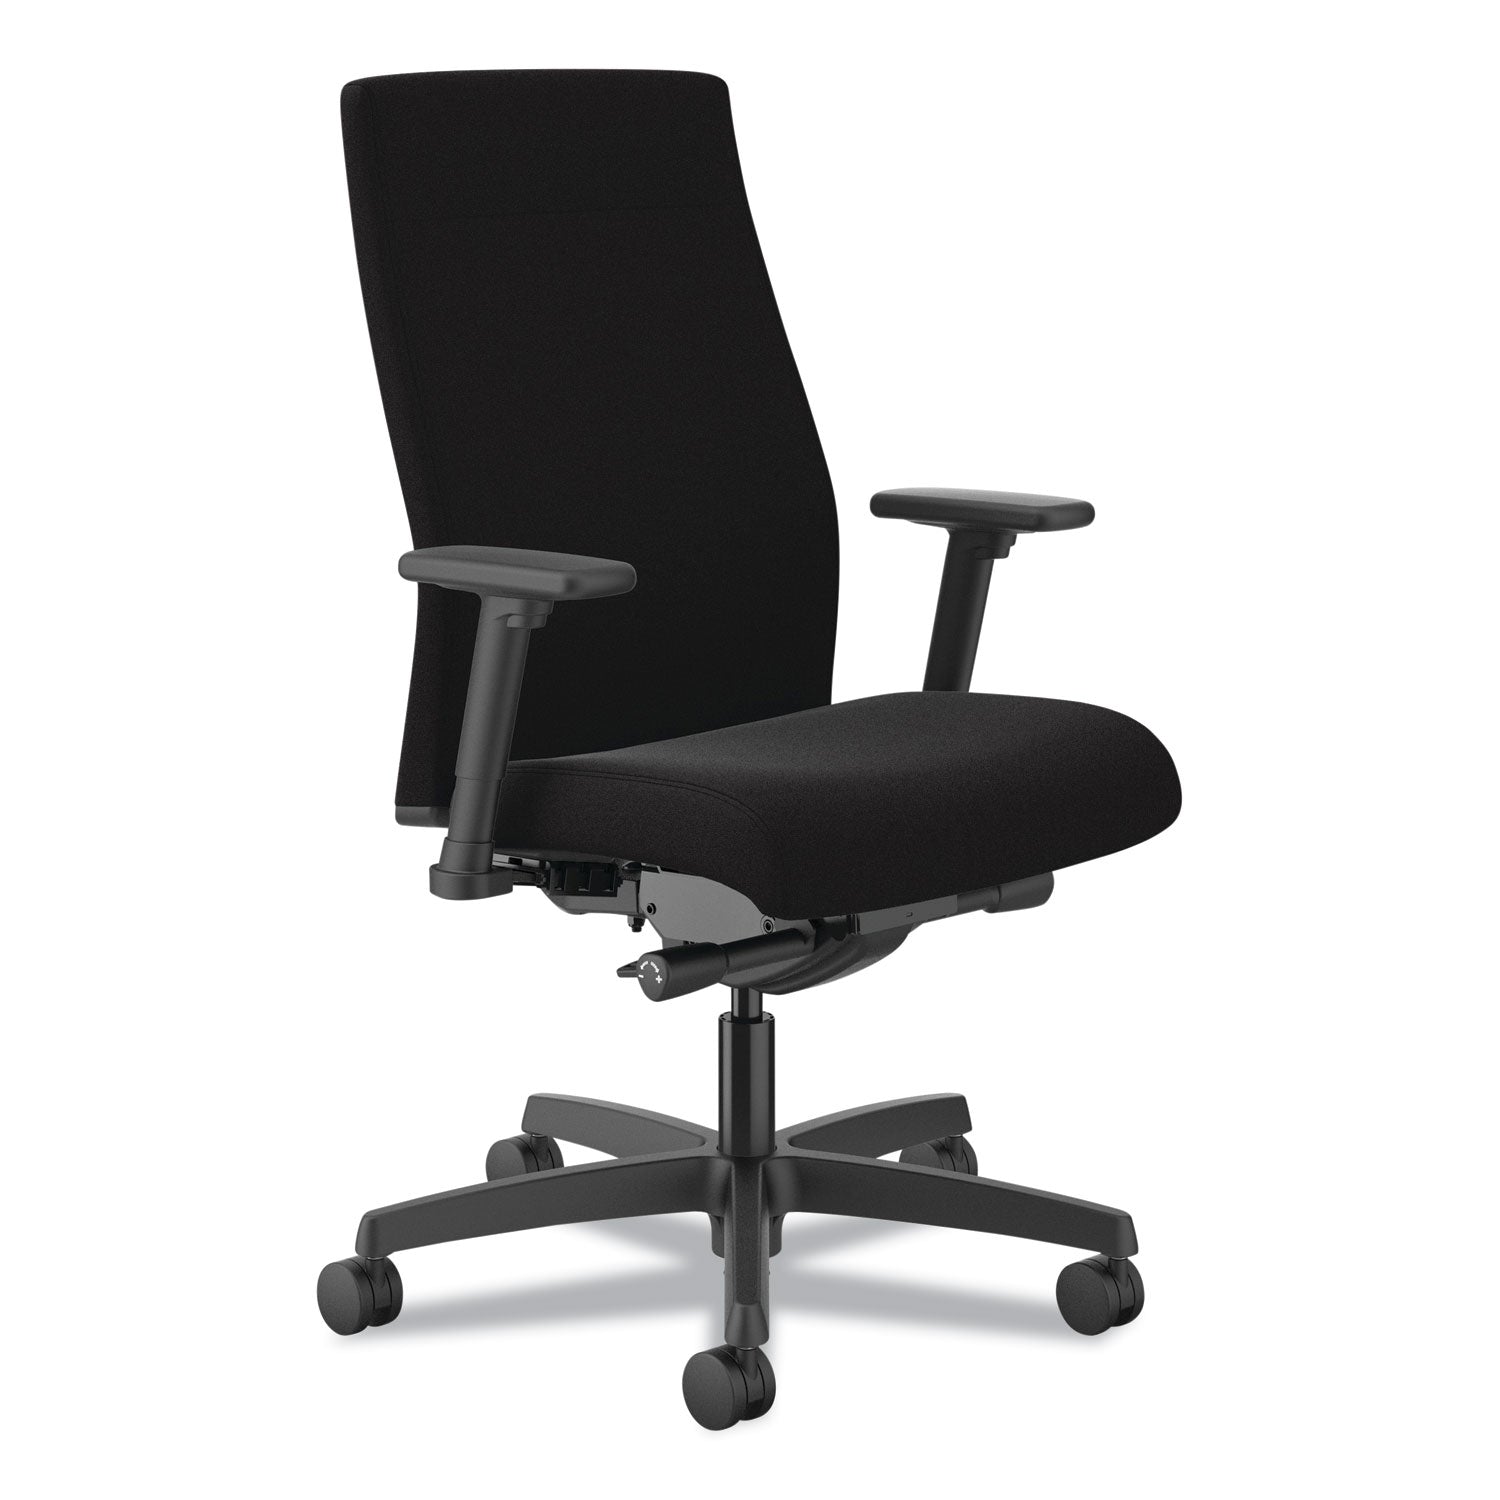 ignition-20-upholstered-mid-back-task-chair-17-to-215-seat-height-black-fabric-seat-back-ships-in-7-10-business-days_honi2u2ahcu10tk - 1